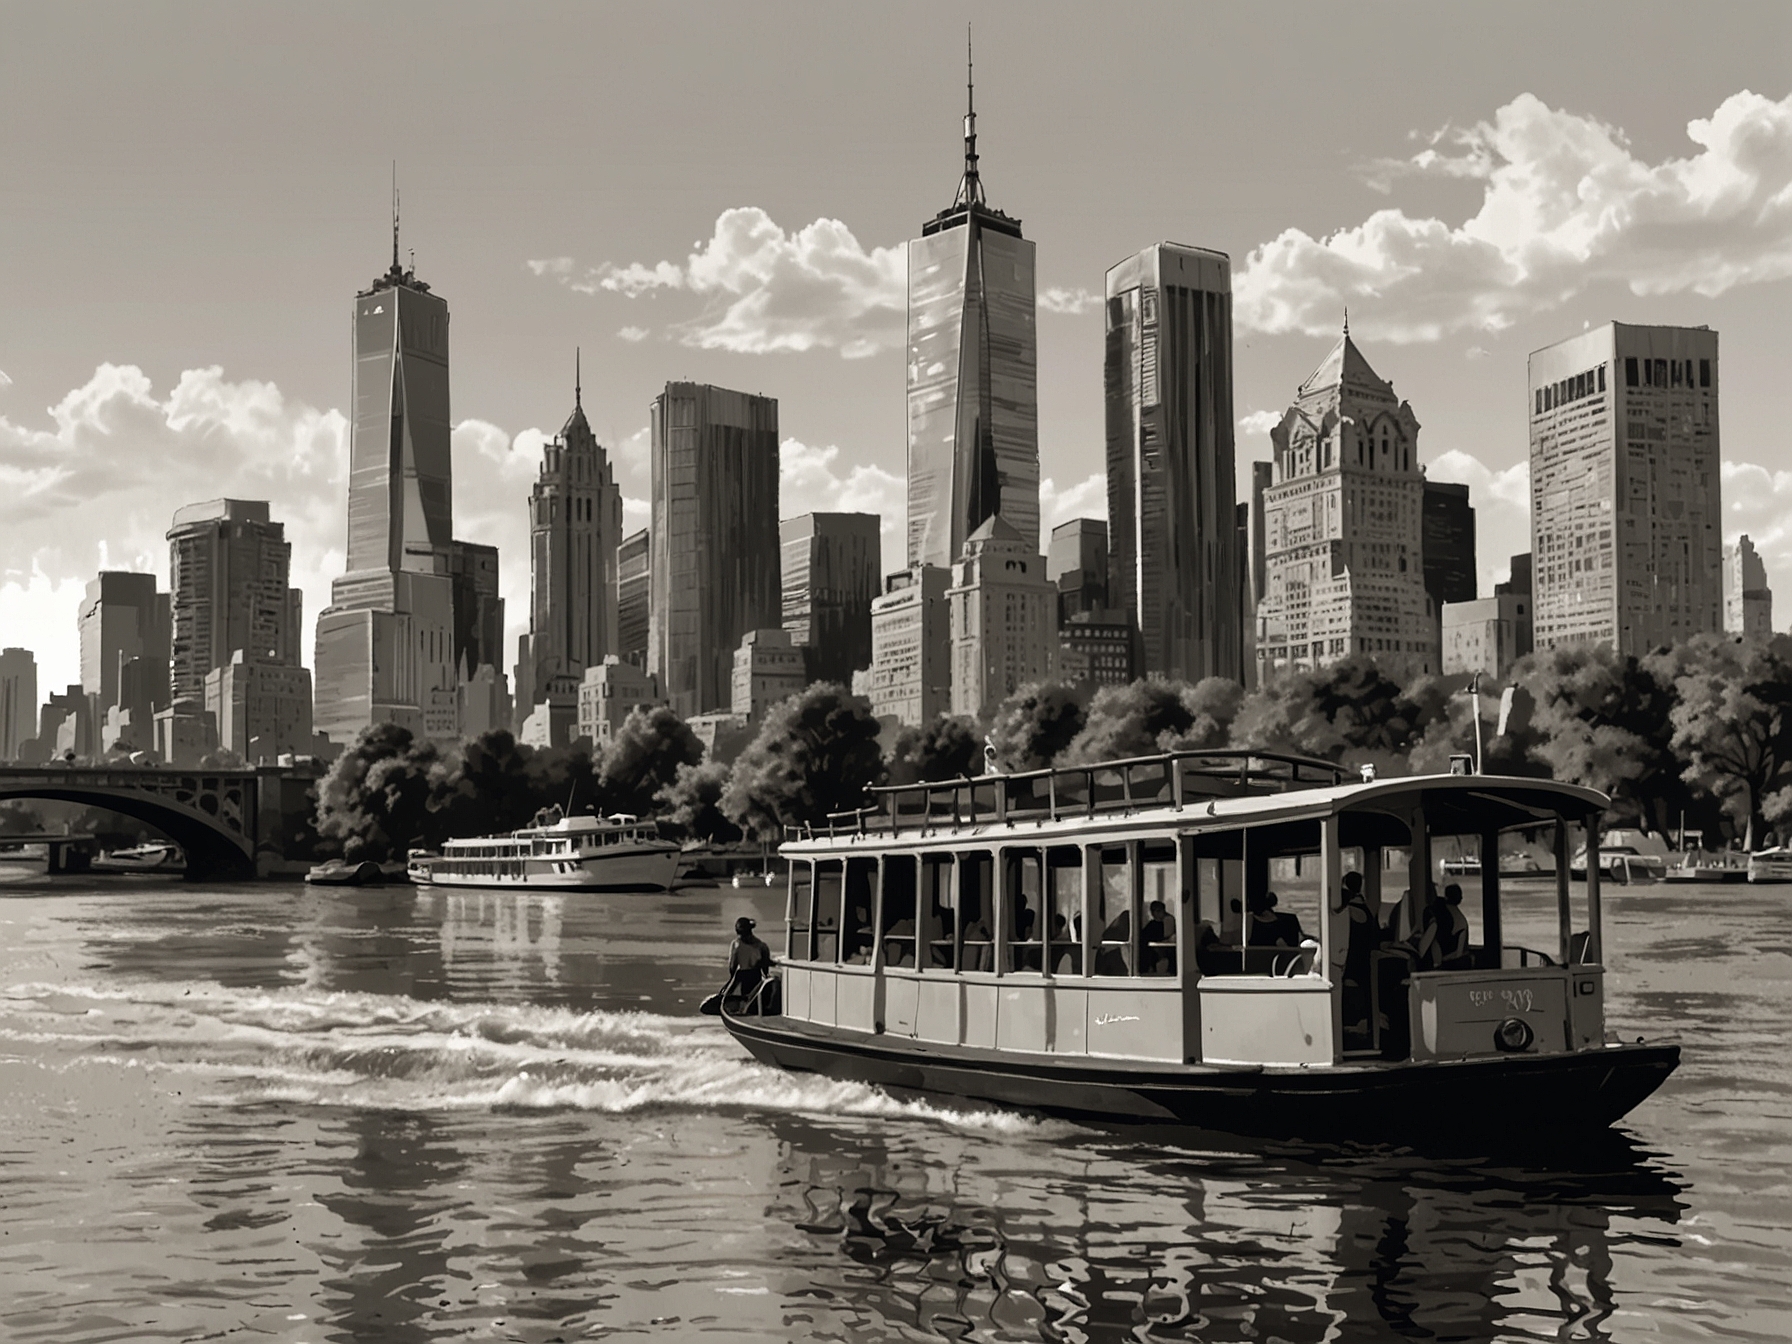 Passengers enjoying a scenic ride on a river taxi, with a backdrop of the city's skyline and natural beauty, highlighting the unique transport feature.